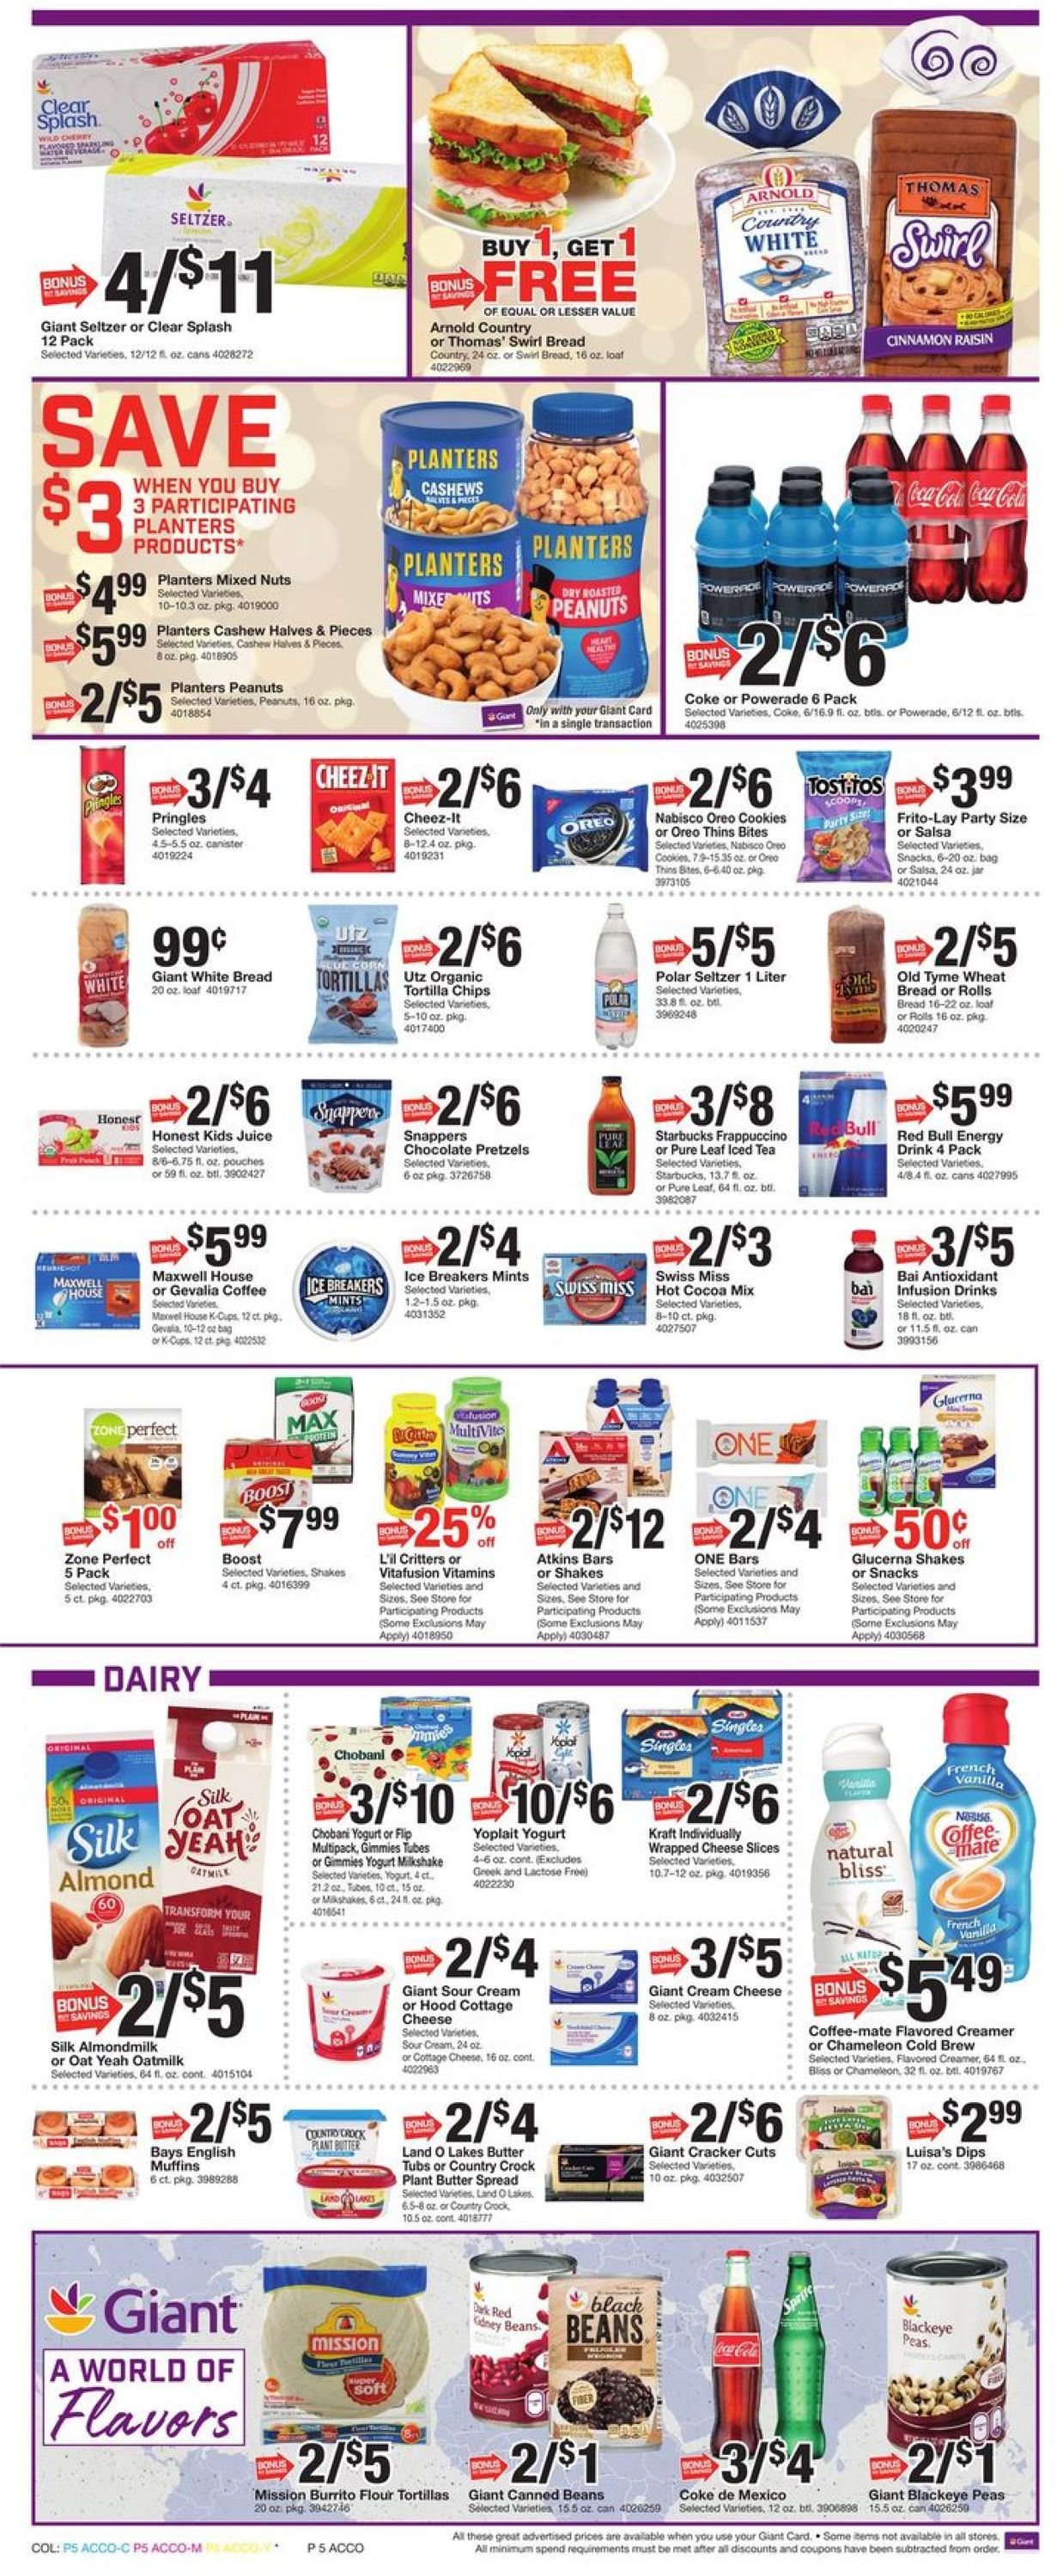 Giant Food - New Year's Ad 2019/2020 Weekly Ad Circular - valid 12/27-01/02/2020 (Page 7)